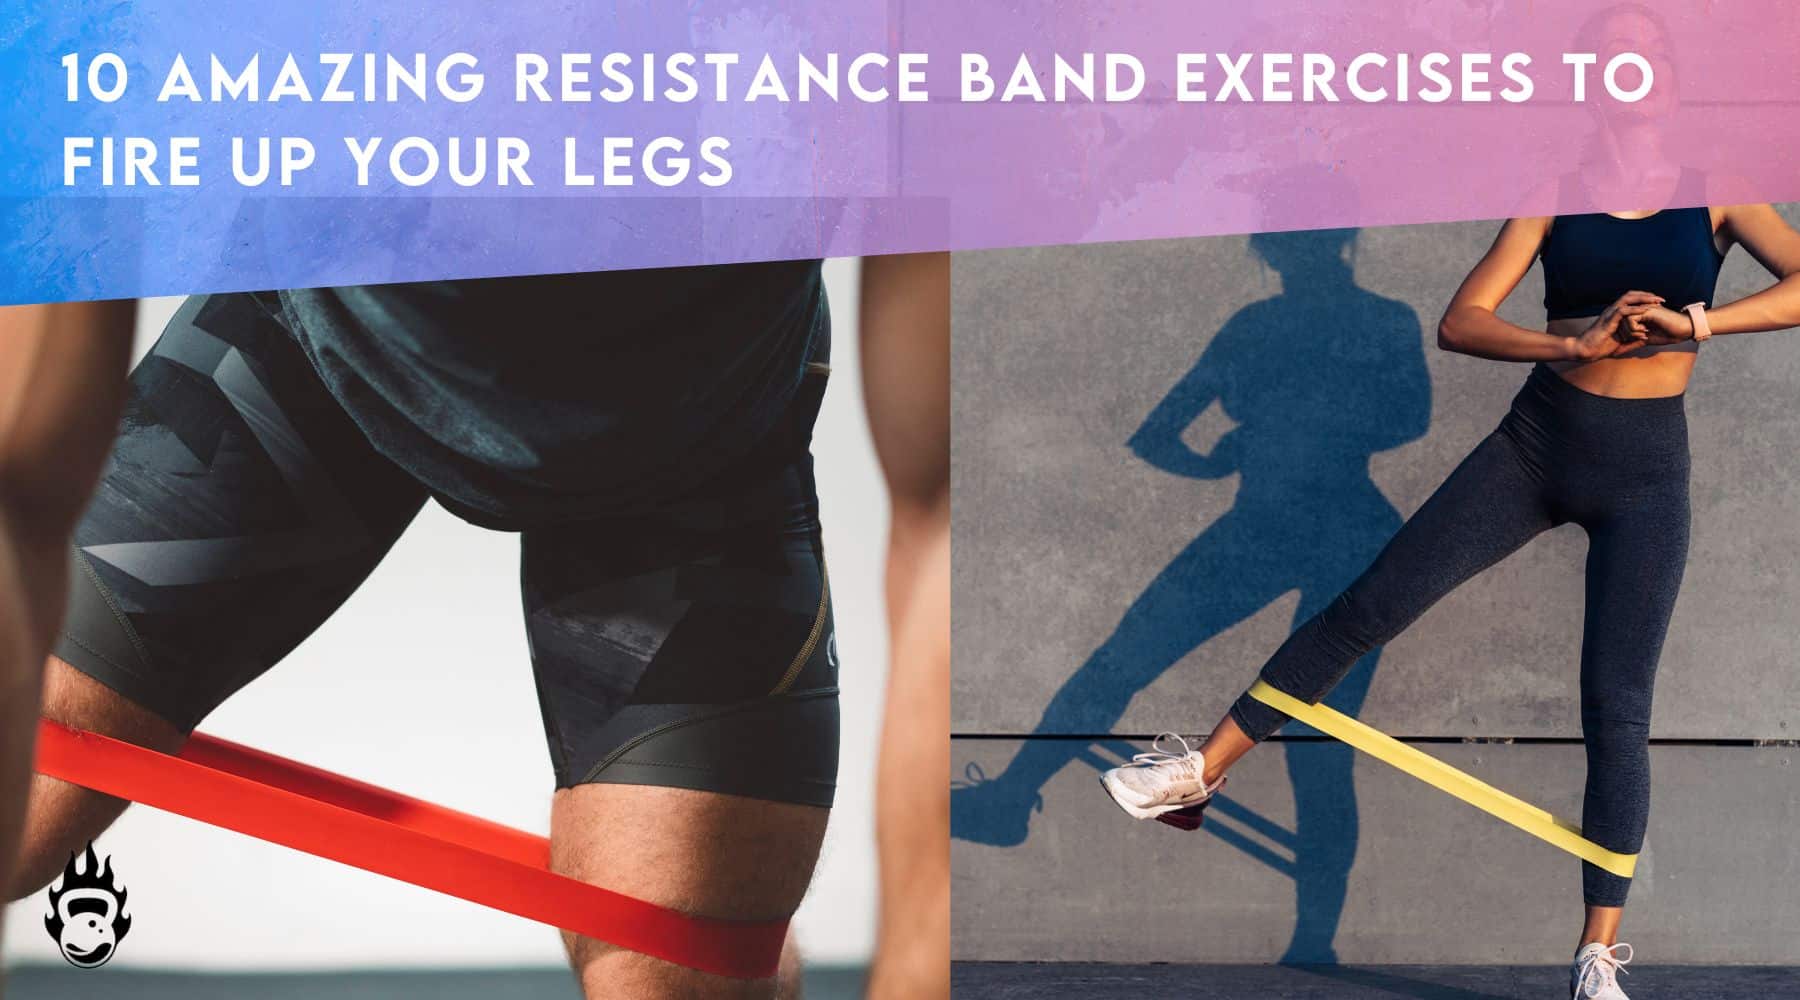 Resistance Band Exercises for Legs  Band workout, Leg workout with bands,  Resistance band exercises